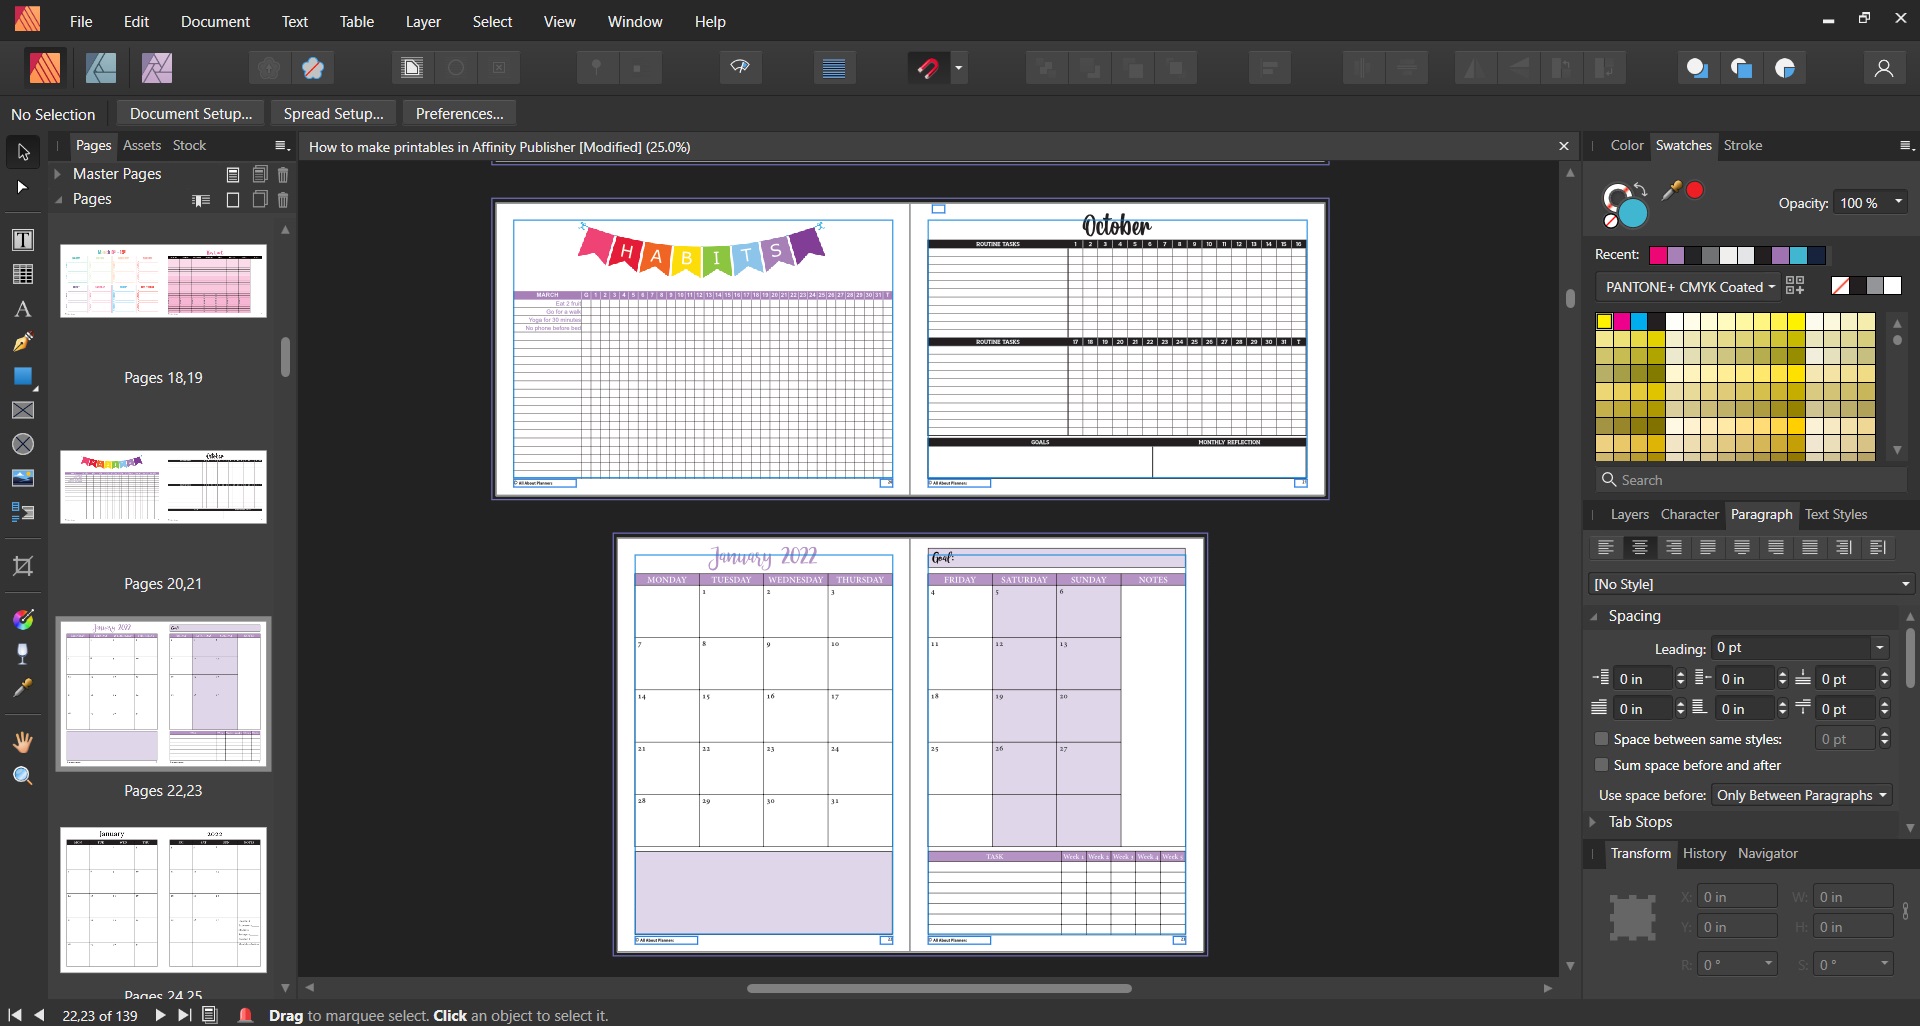 how to make printables in affinity publisher video tutorials monthly calendar landscape portrait page orientation all about planners